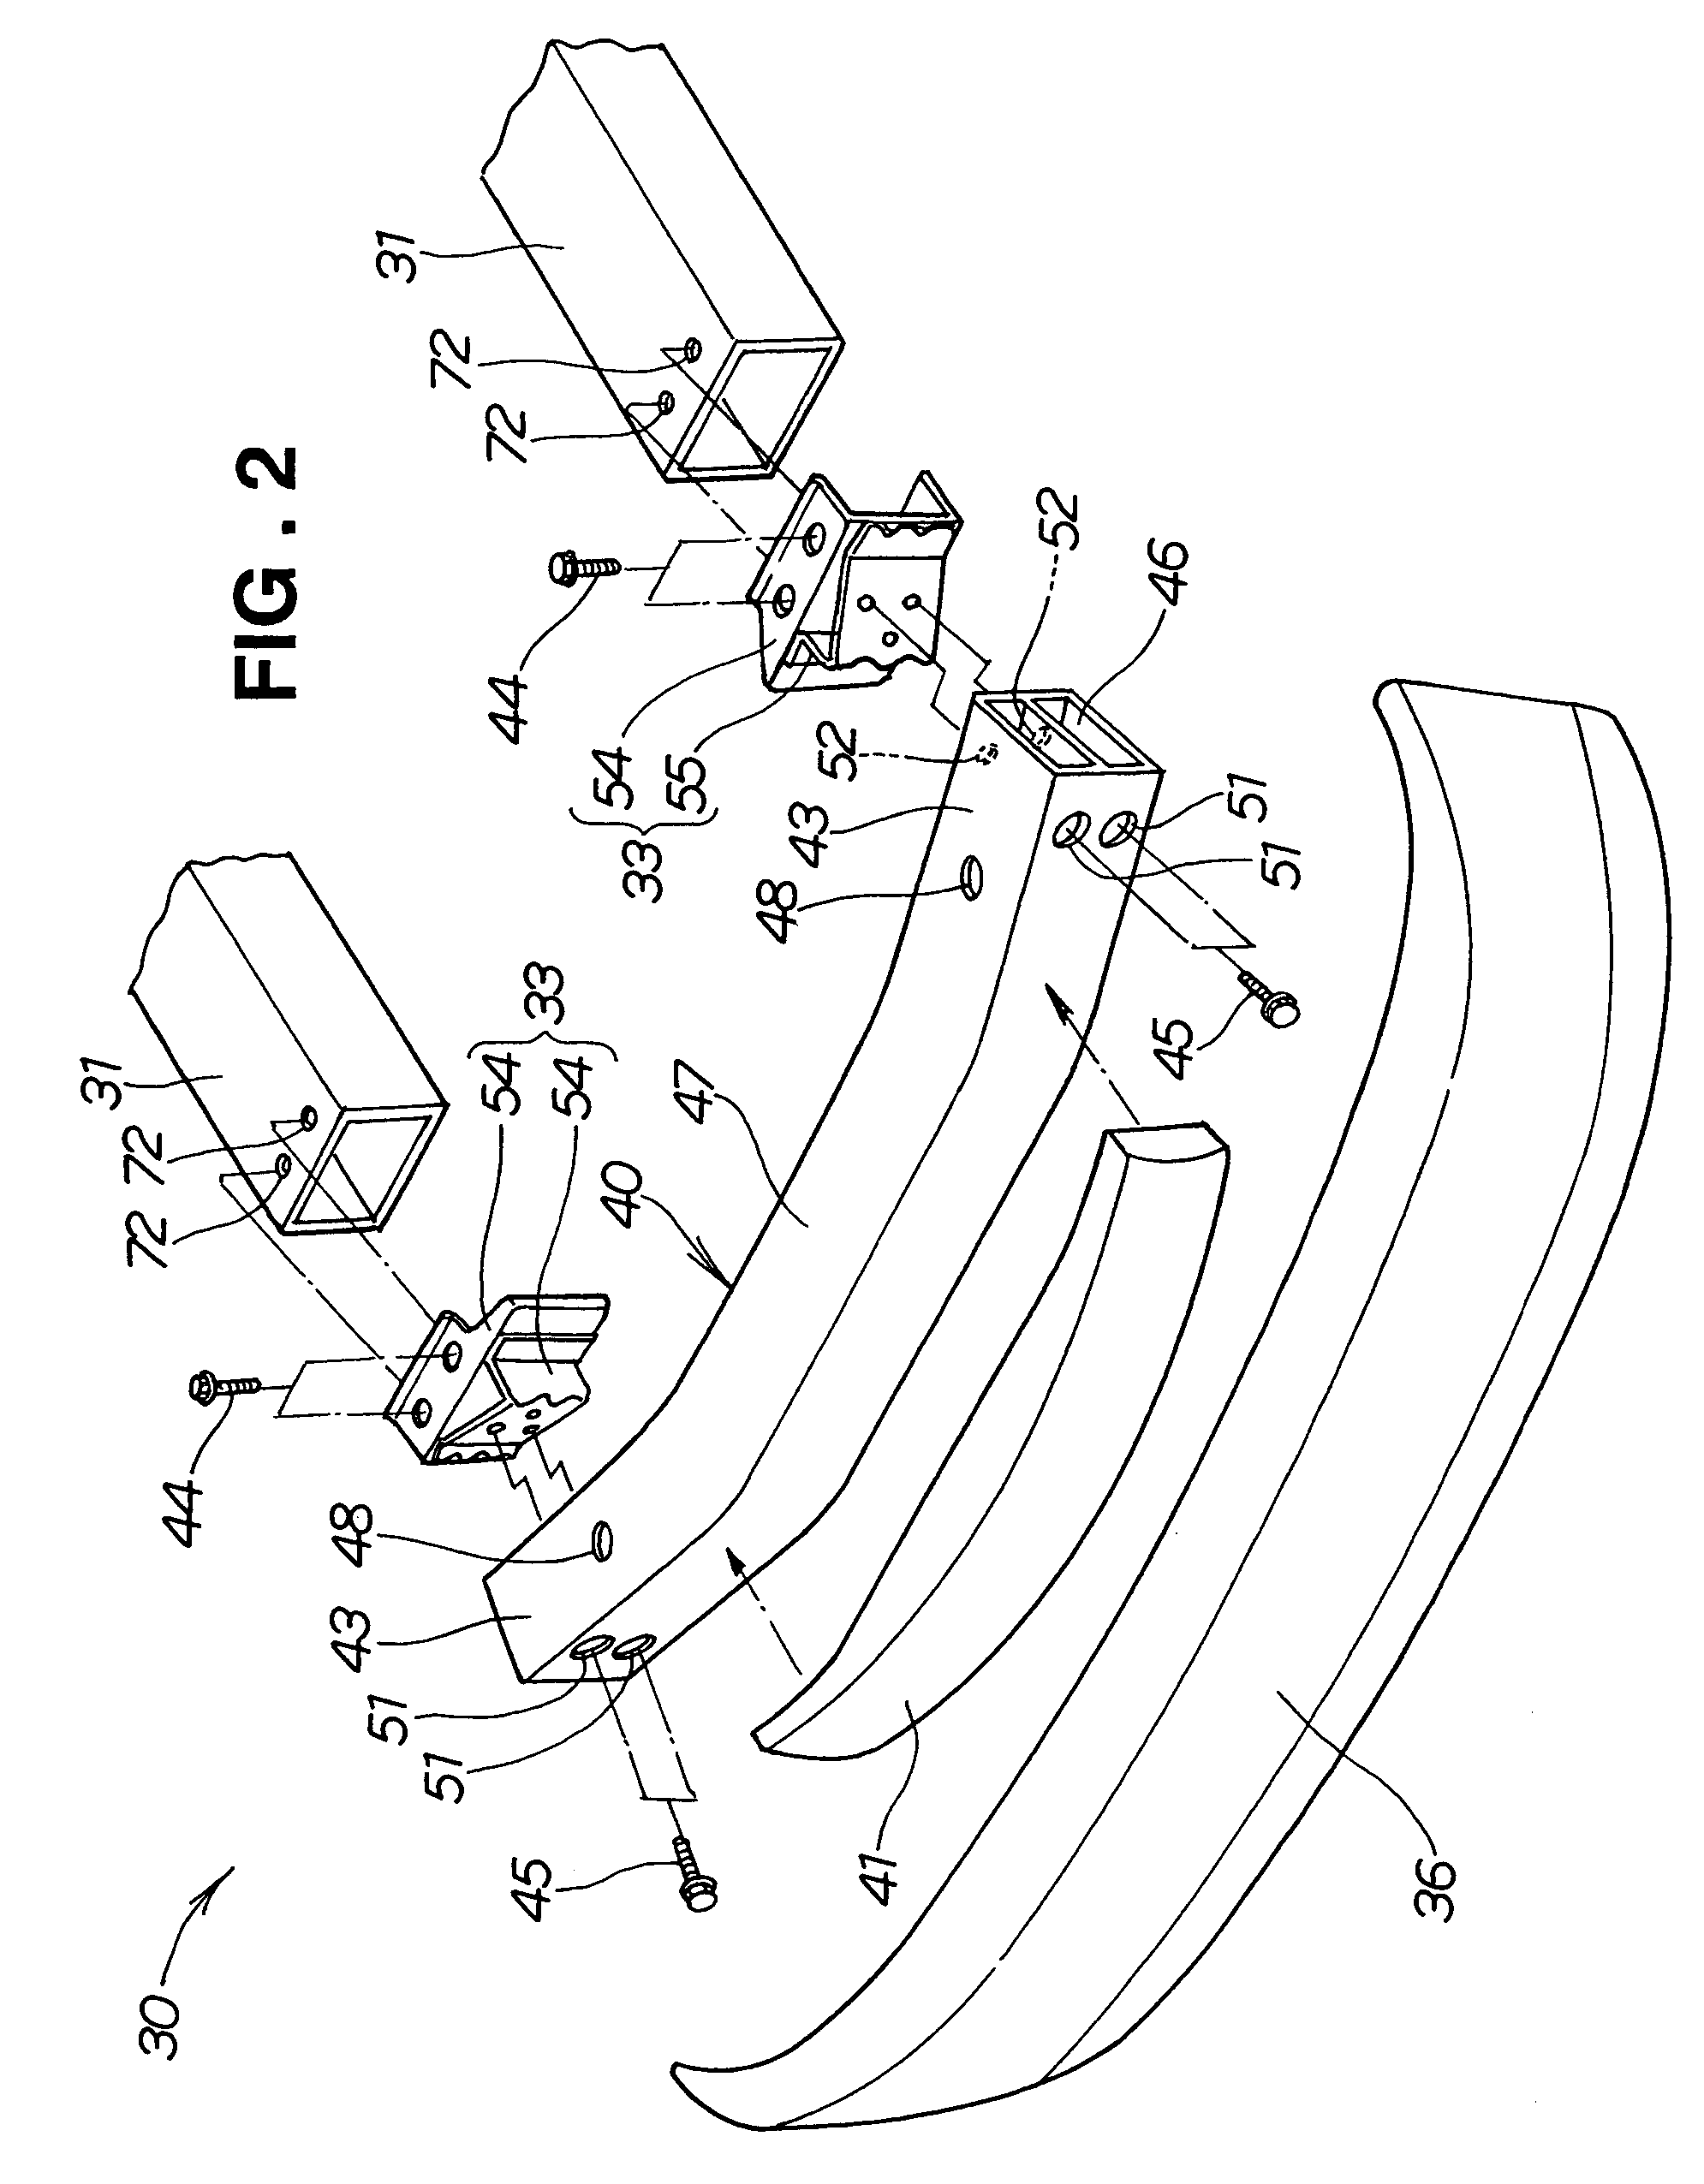 Vehicle bumper beam mounting structure